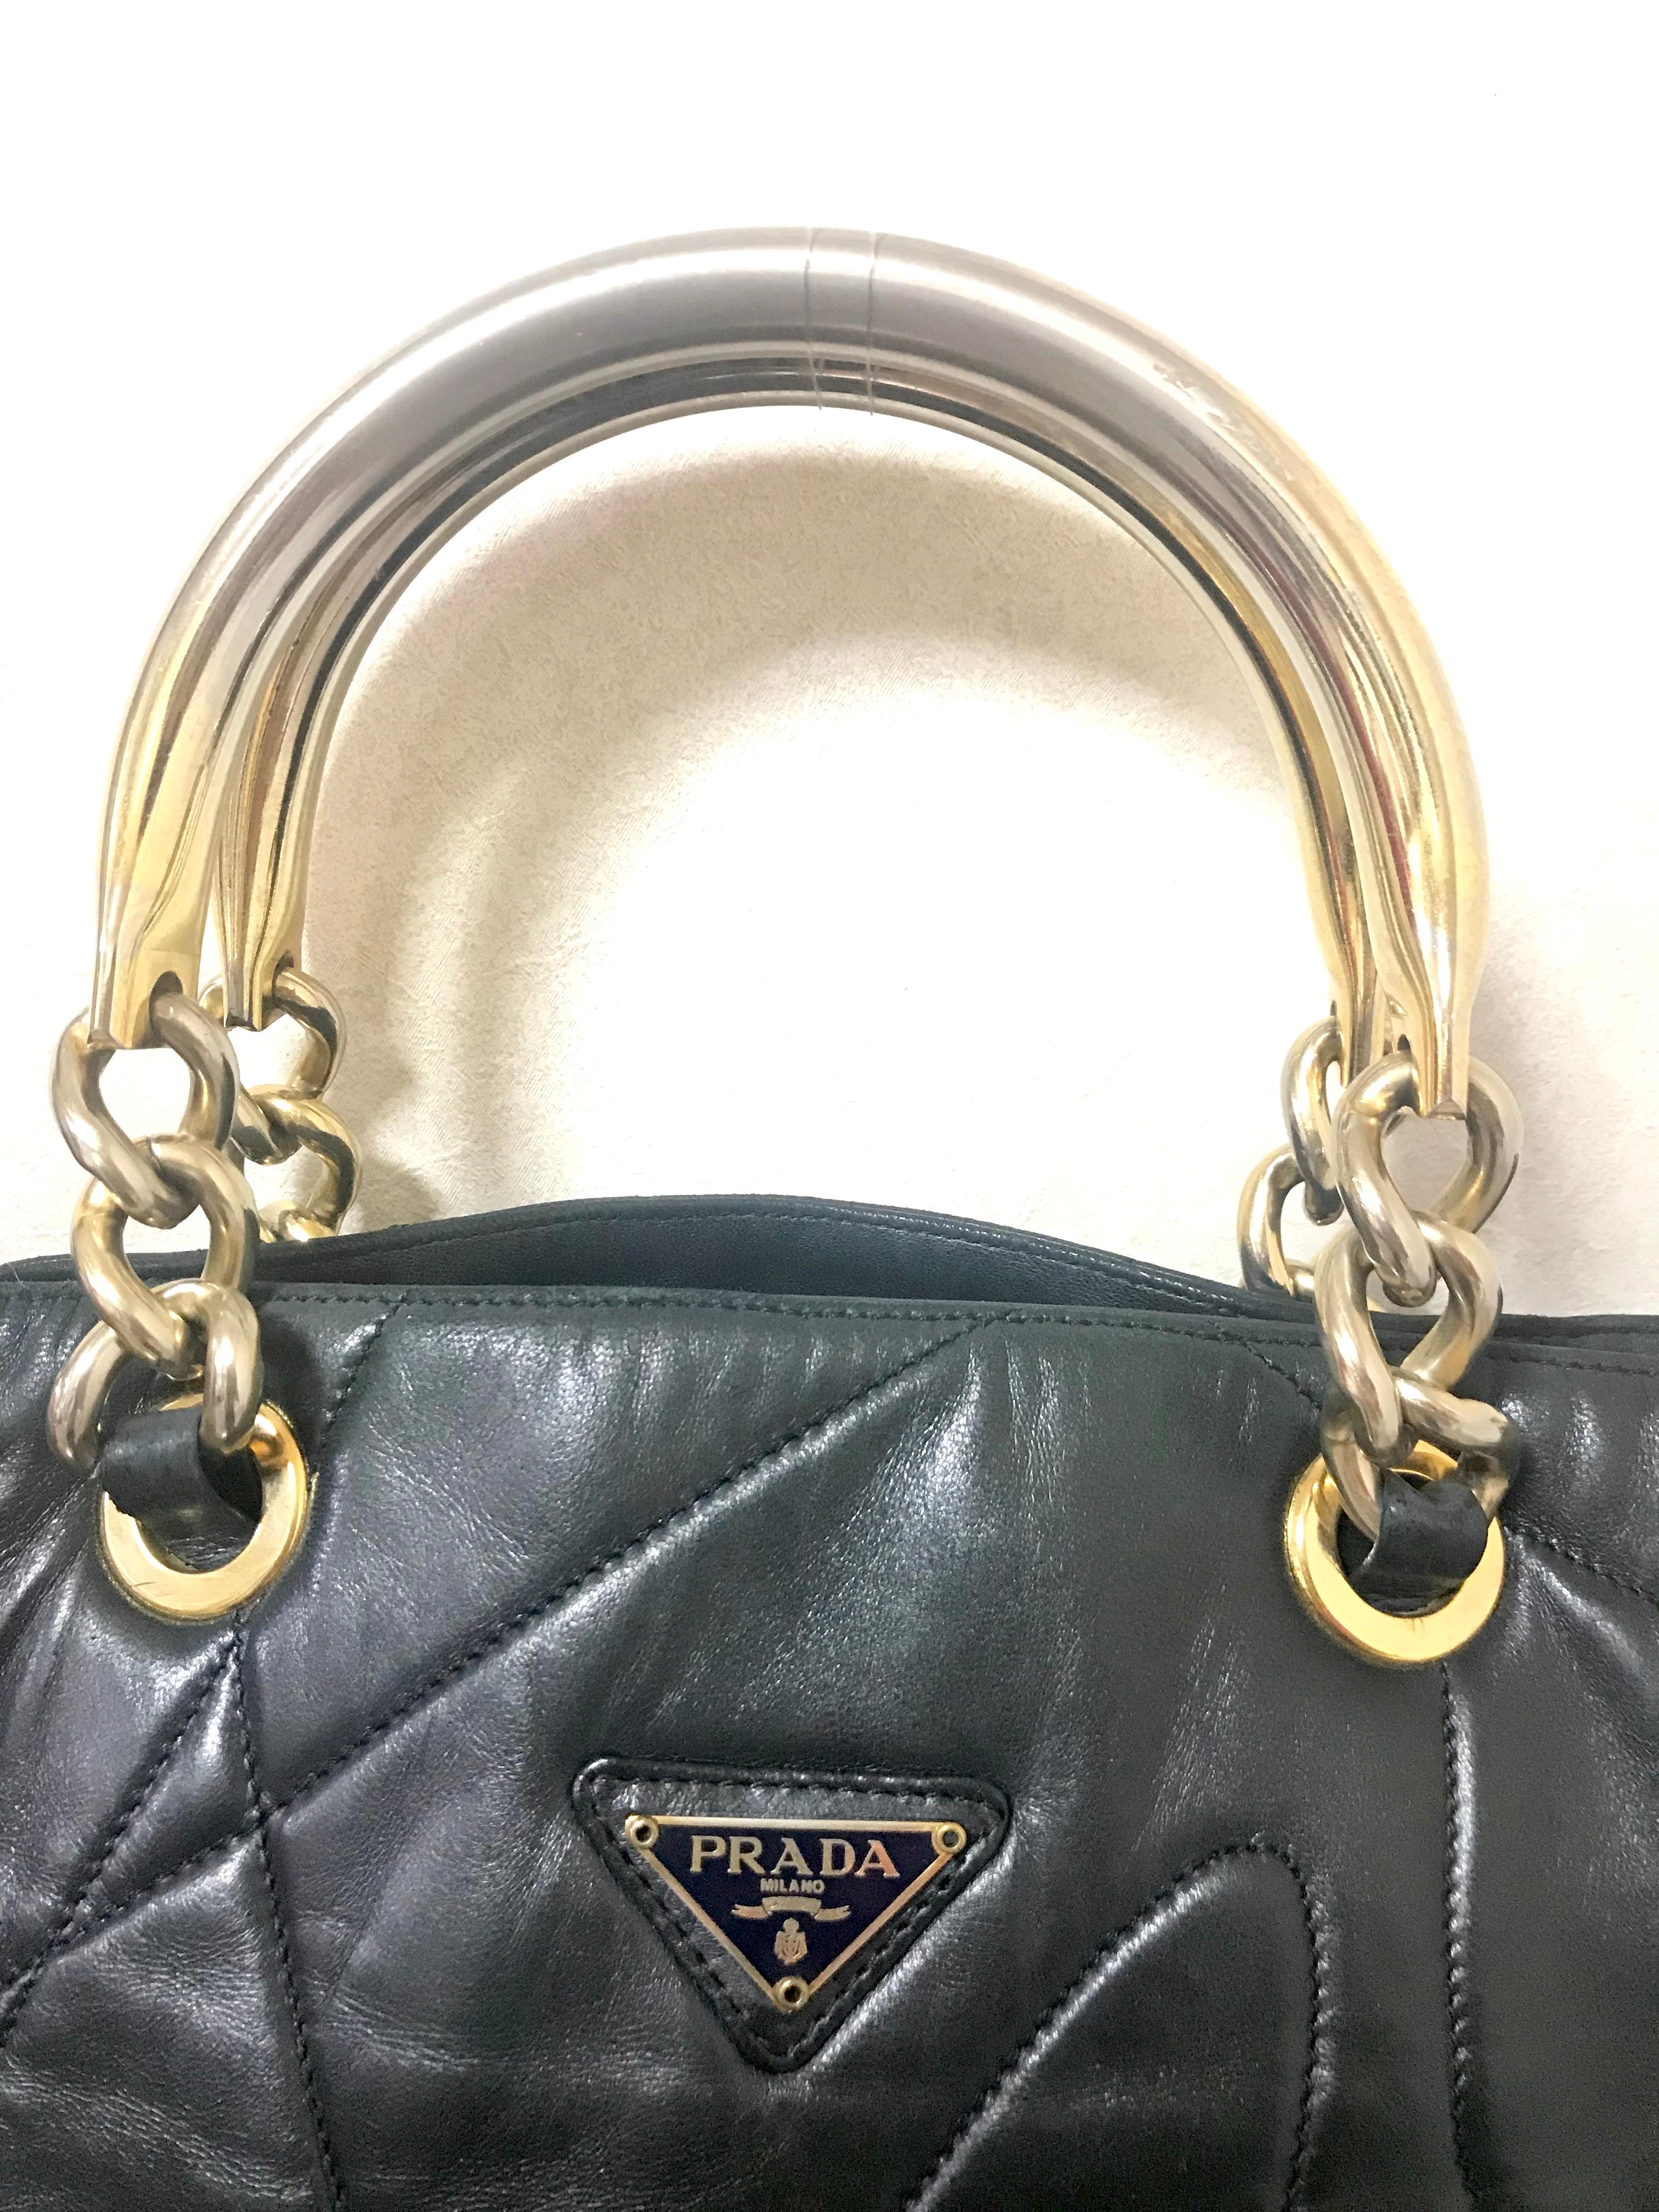 Prada Vintage black leather geometric patchwork tote bag with metallic handles  In Good Condition For Sale In Kashiwa, Chiba